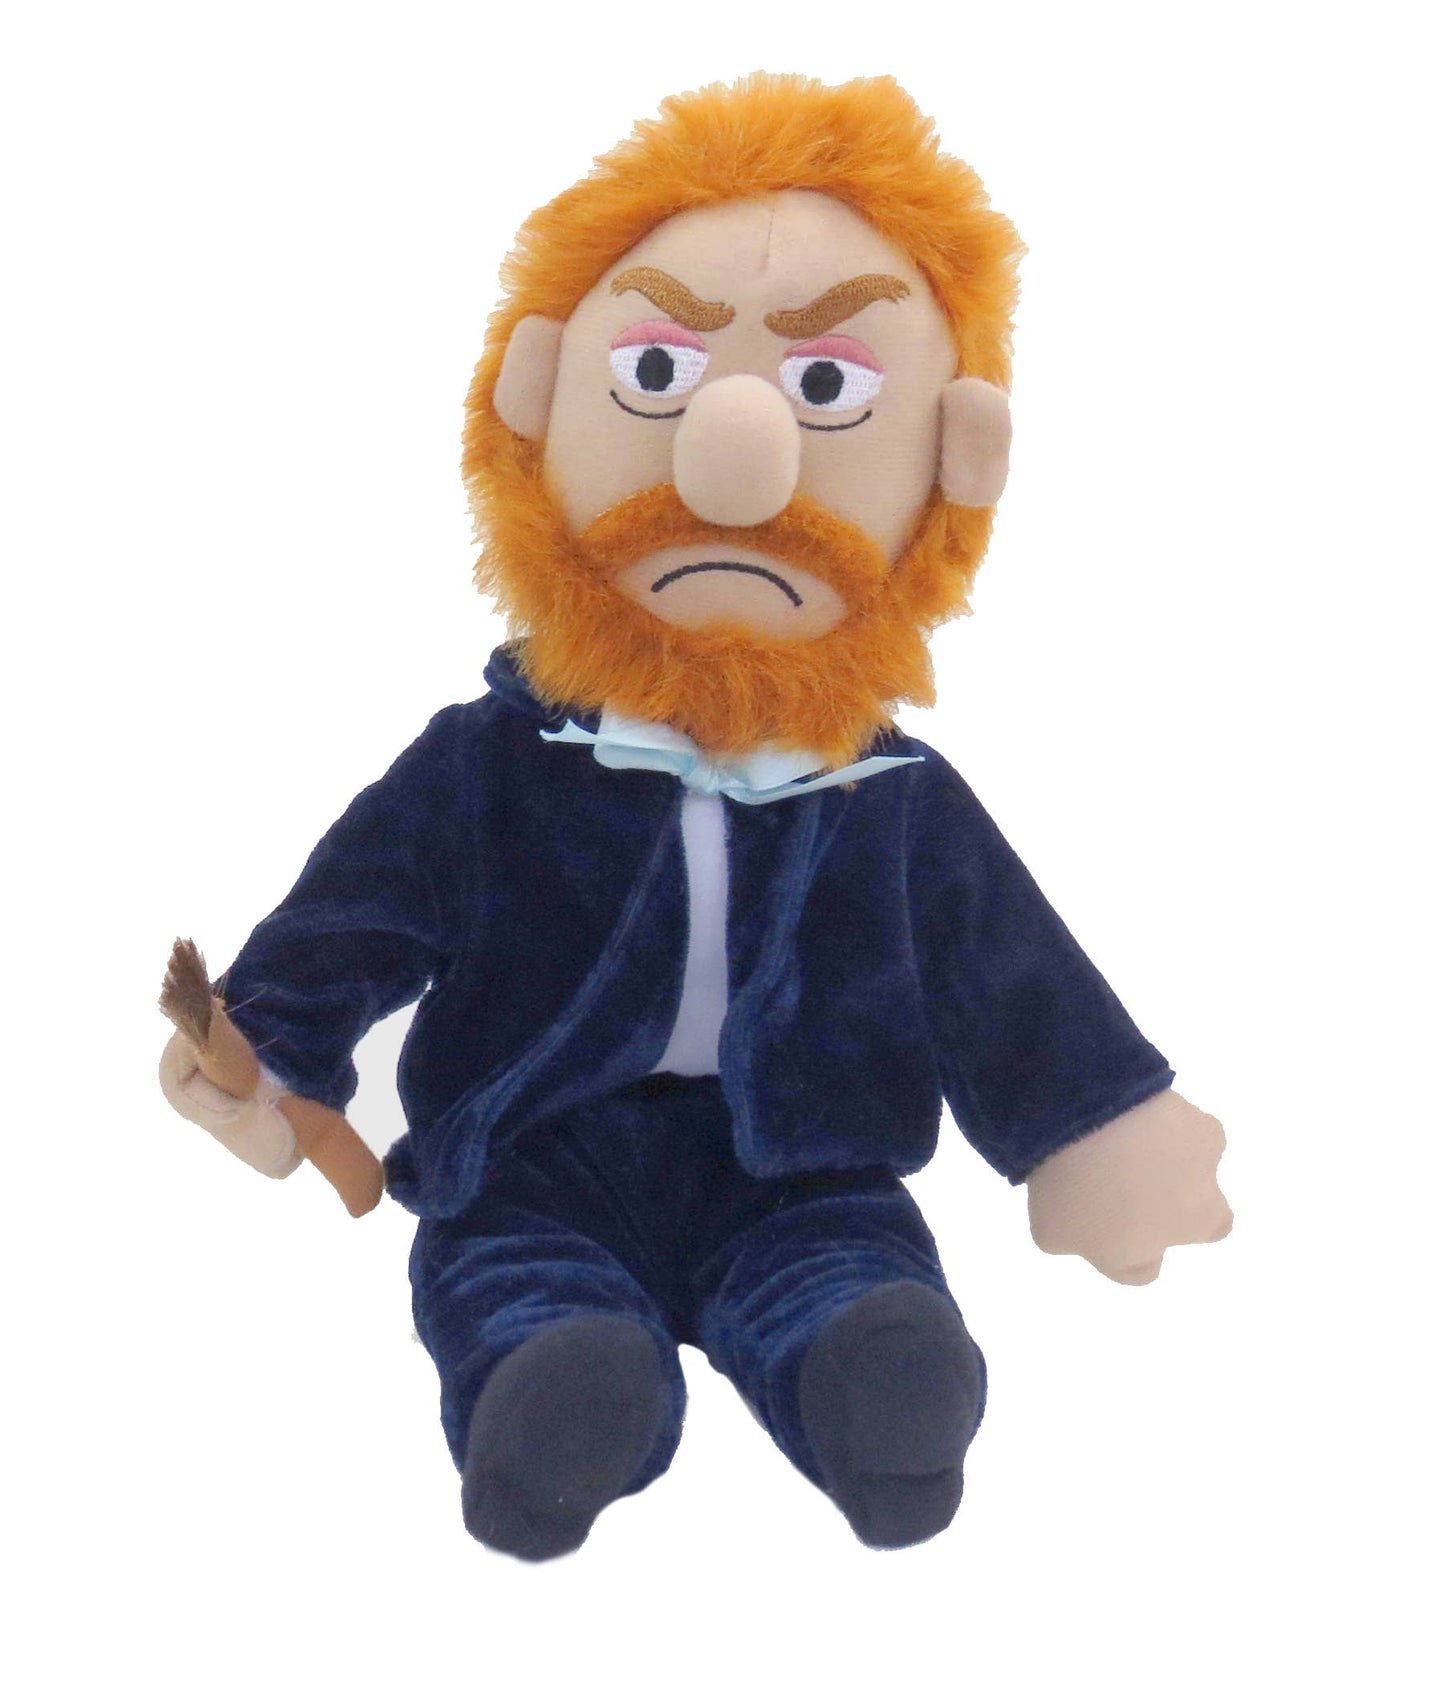 Vincent Van Gogh - Little Thinker Soft Doll from The Unemployed Philosophers Guild